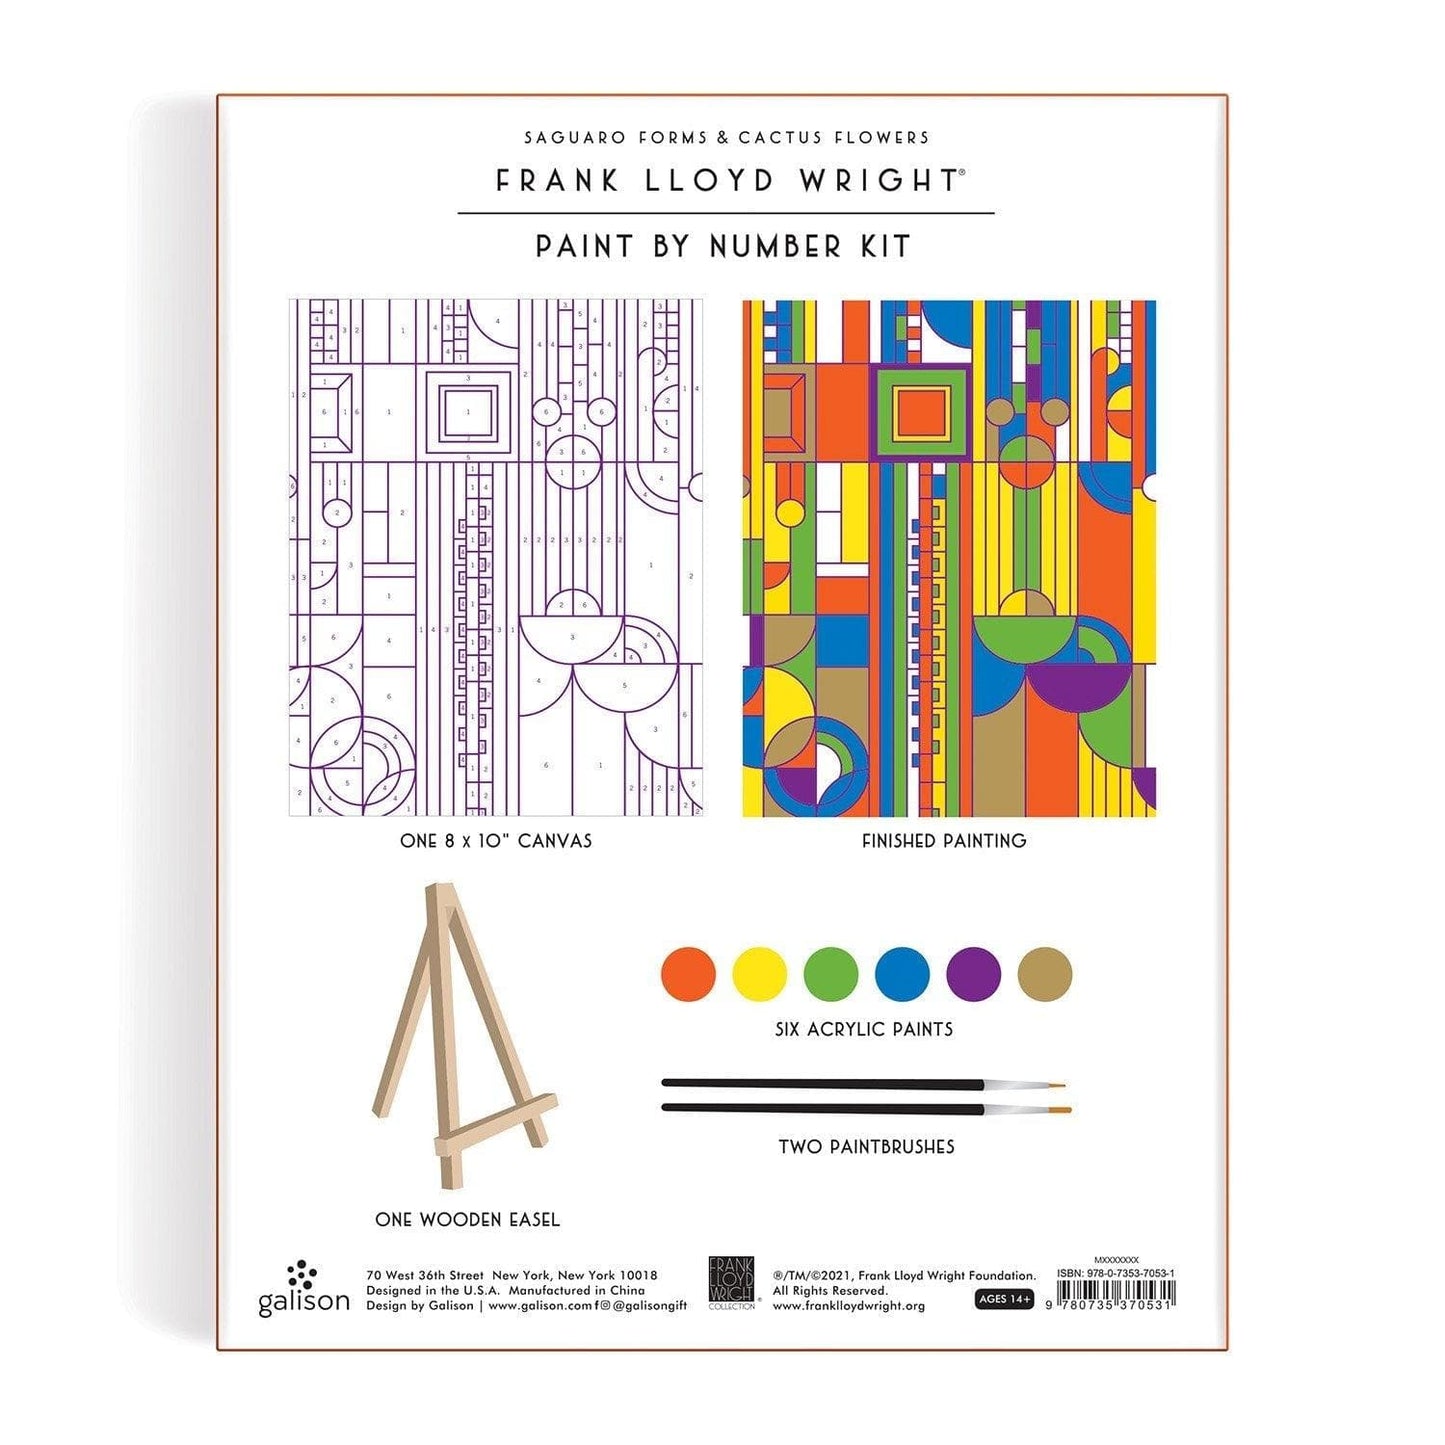 Frank Lloyd Wright Saguaro Cactus and Forms Paint By Number Kit Frank Lloyd Wright Saguaro Cactus and Forms Paint By Number Kit 